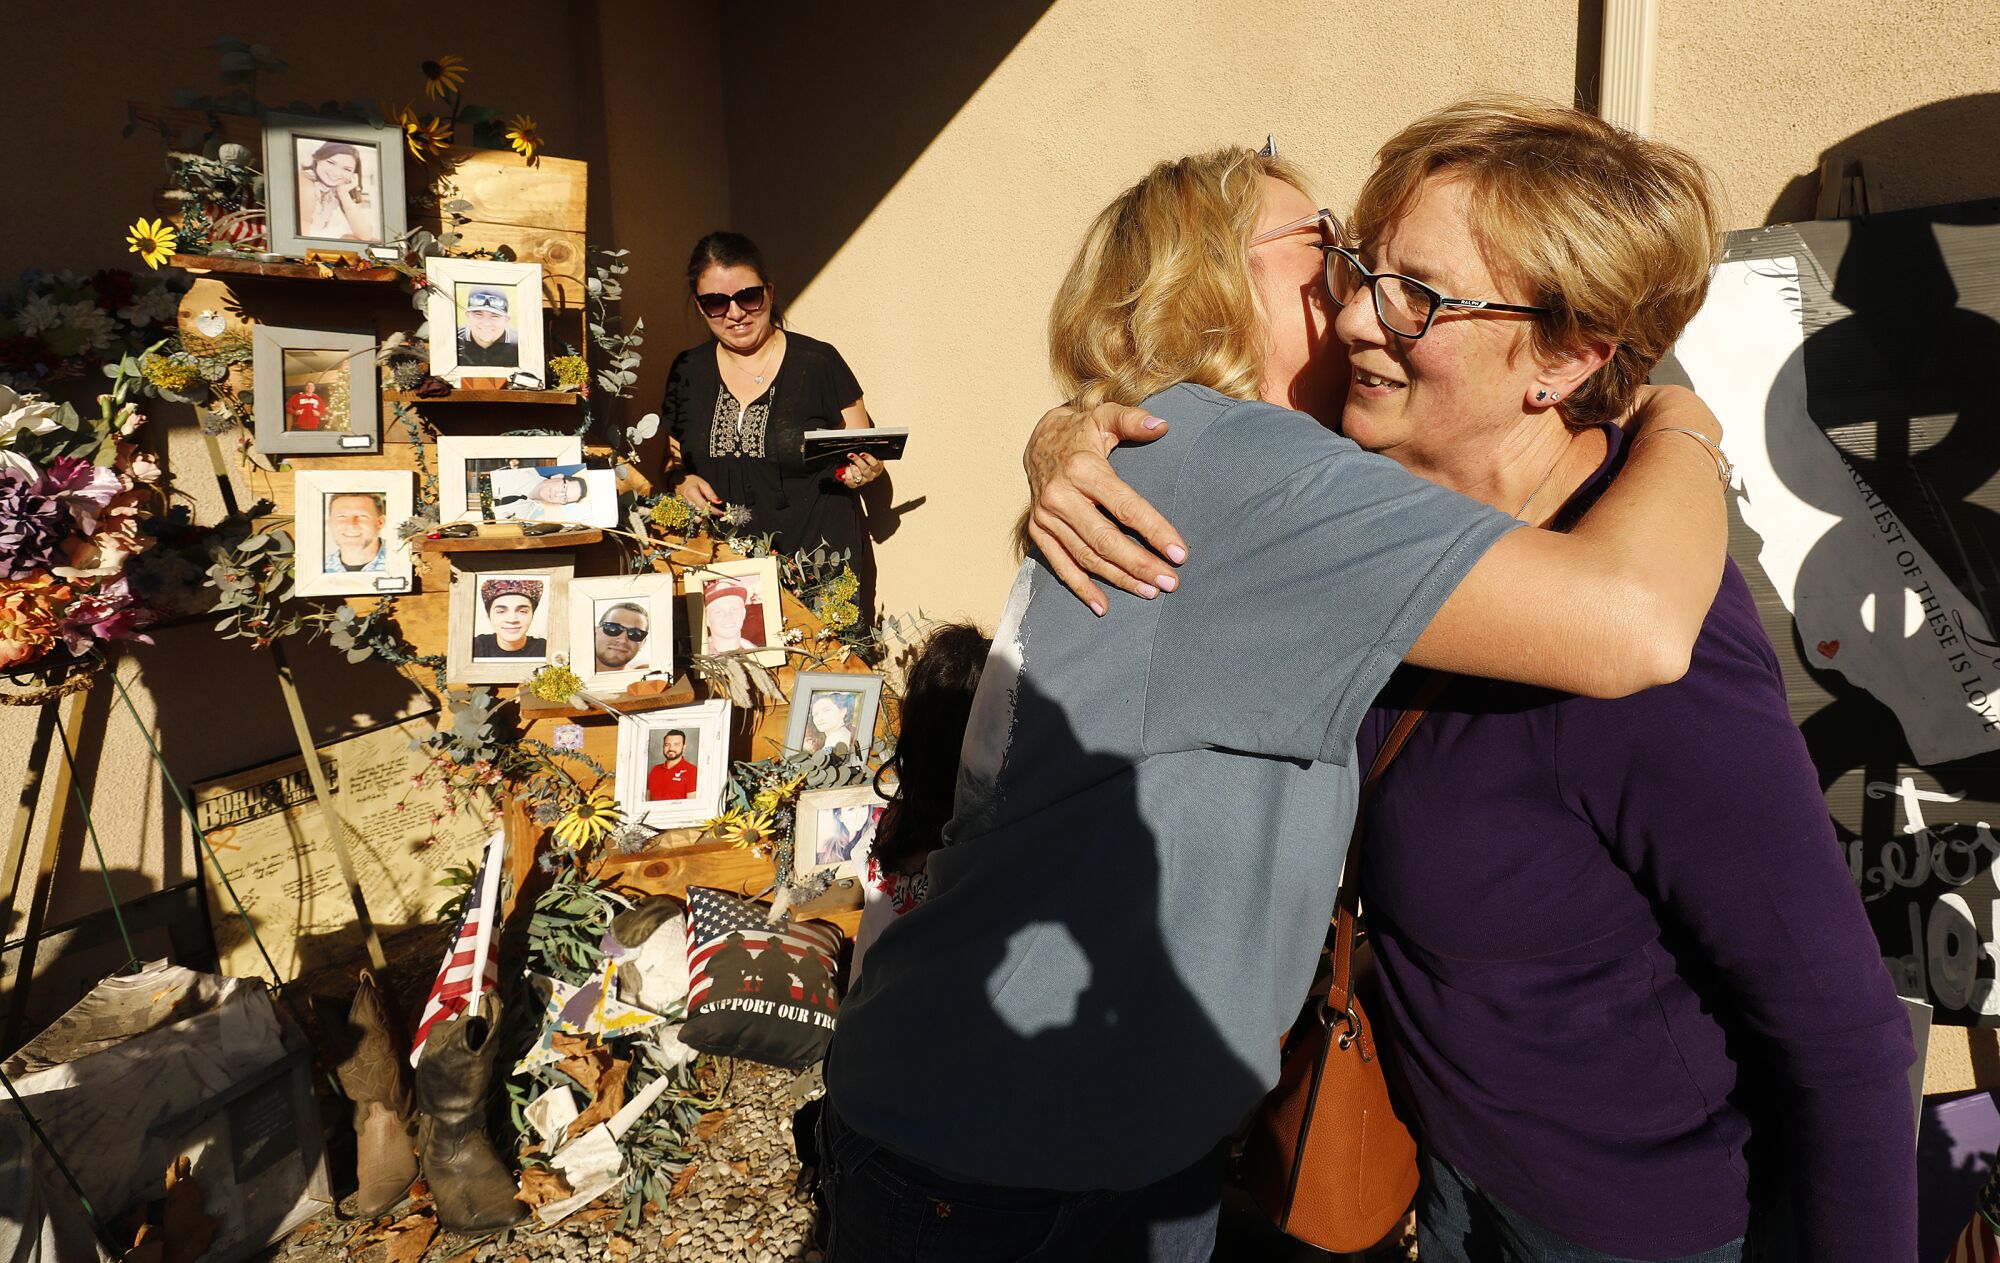 Kathy Dunham, left, Mother of Jake Dunham, 21, hugs Elsa Manrique, right, Mother of Dan Manrique, 33, both who were among those killed in the mass shooting at the Borderline Bar & Grill in Thousand Oaks. They visited at the memorial to the 12 victims that stands in front of the country-western bar frequented by college students as the one year anniversary of the shooting on Nov 7, 2018 draws near.